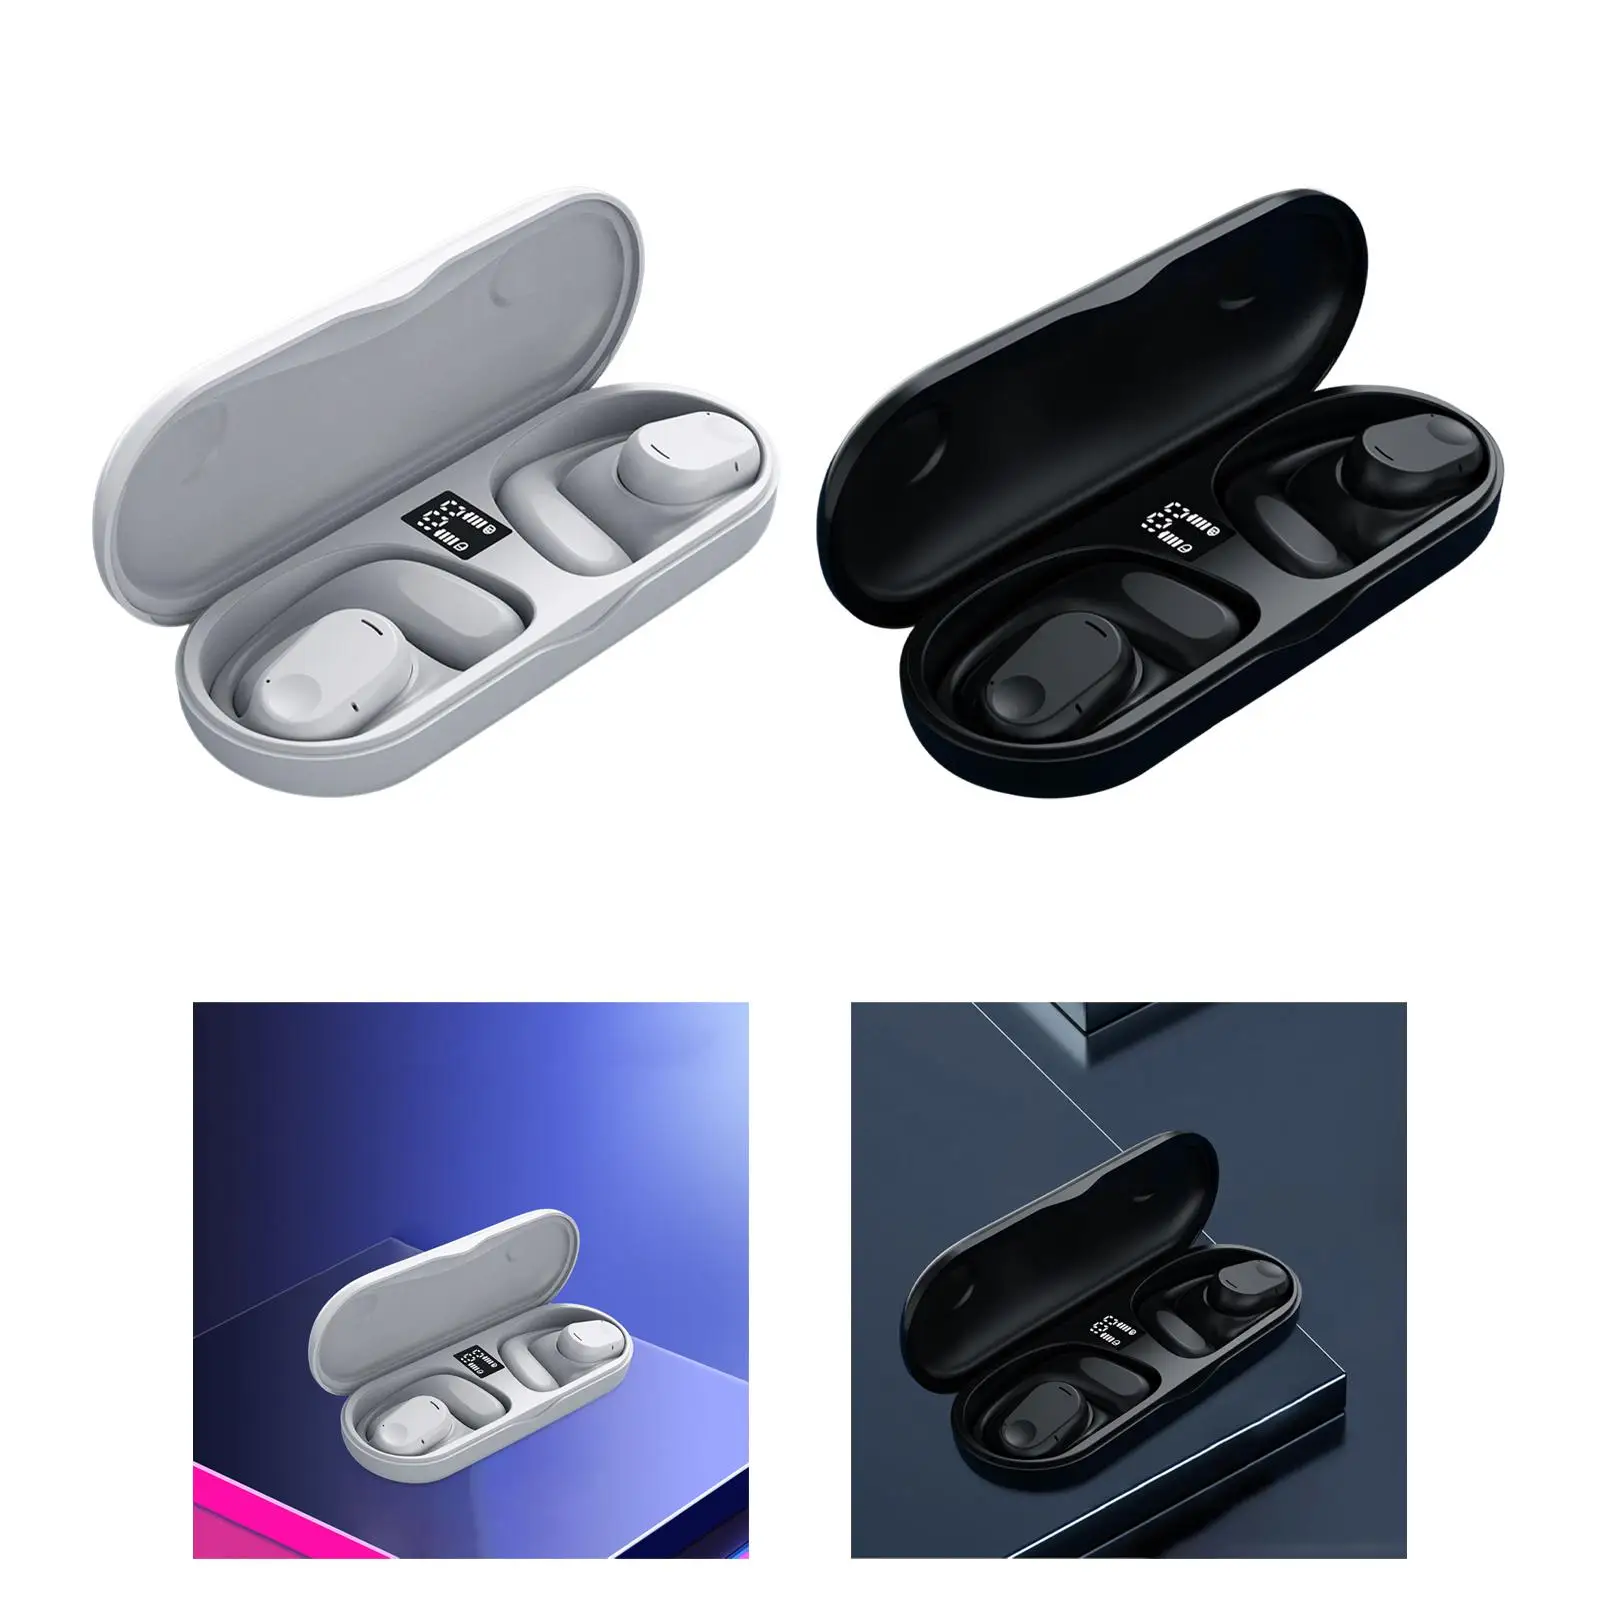 V5.3 Wireless Earphones Built in Microphone Low Latency Hands Free Ear Clip Design Headphones for Running Fitness Sports Office